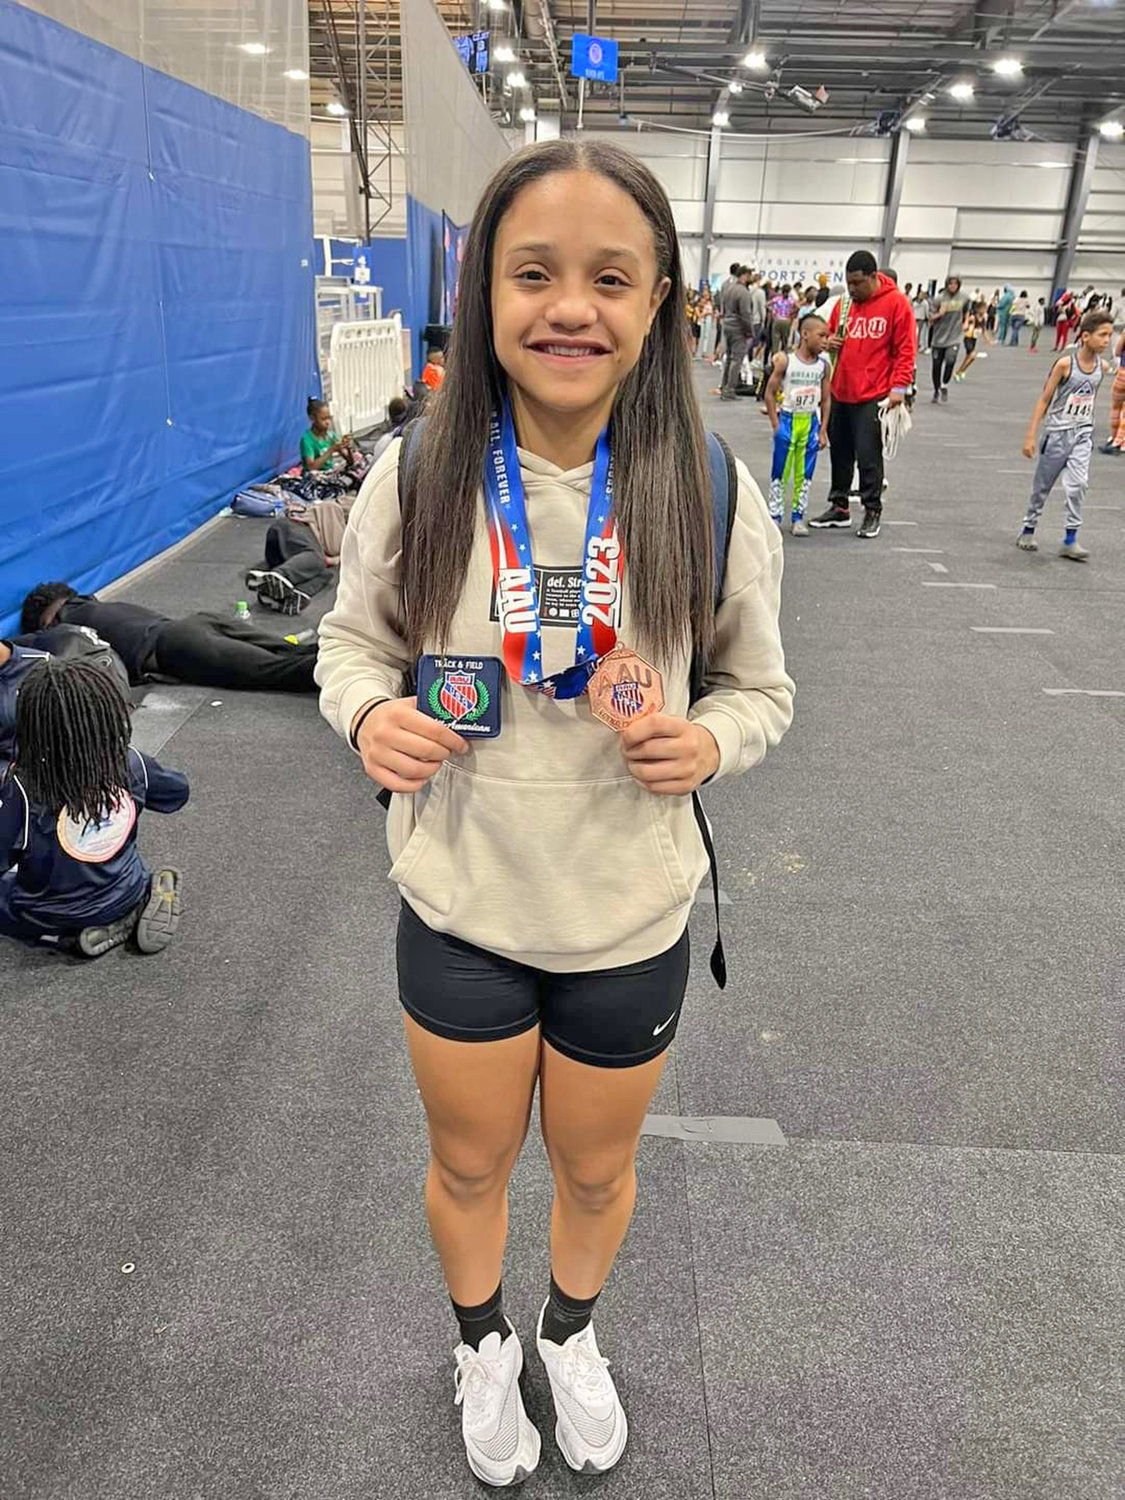 Raiyah Patterson of Utica took third in the long jump at the 2023 AAU Indoor Track and Field Nationals in Virginia Beach.